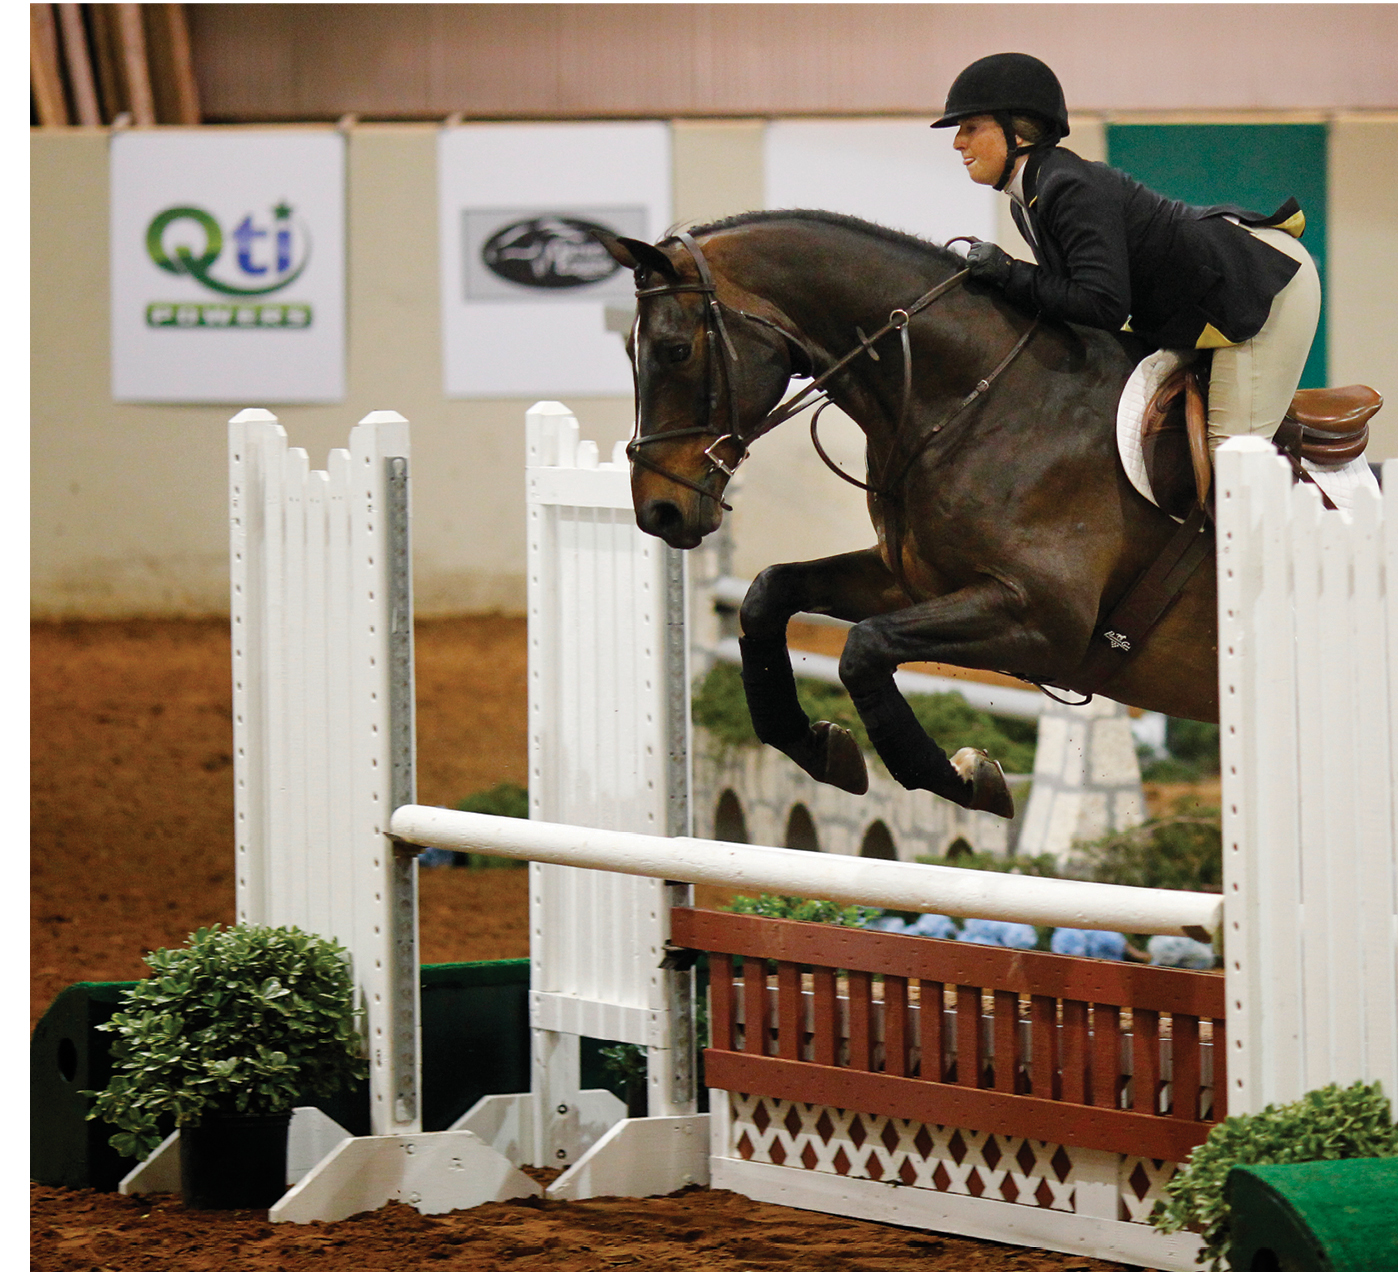 6 things you should know about Baylor Equestrian | Baylor Magazine, Summer 2012 ...1398 x 1272